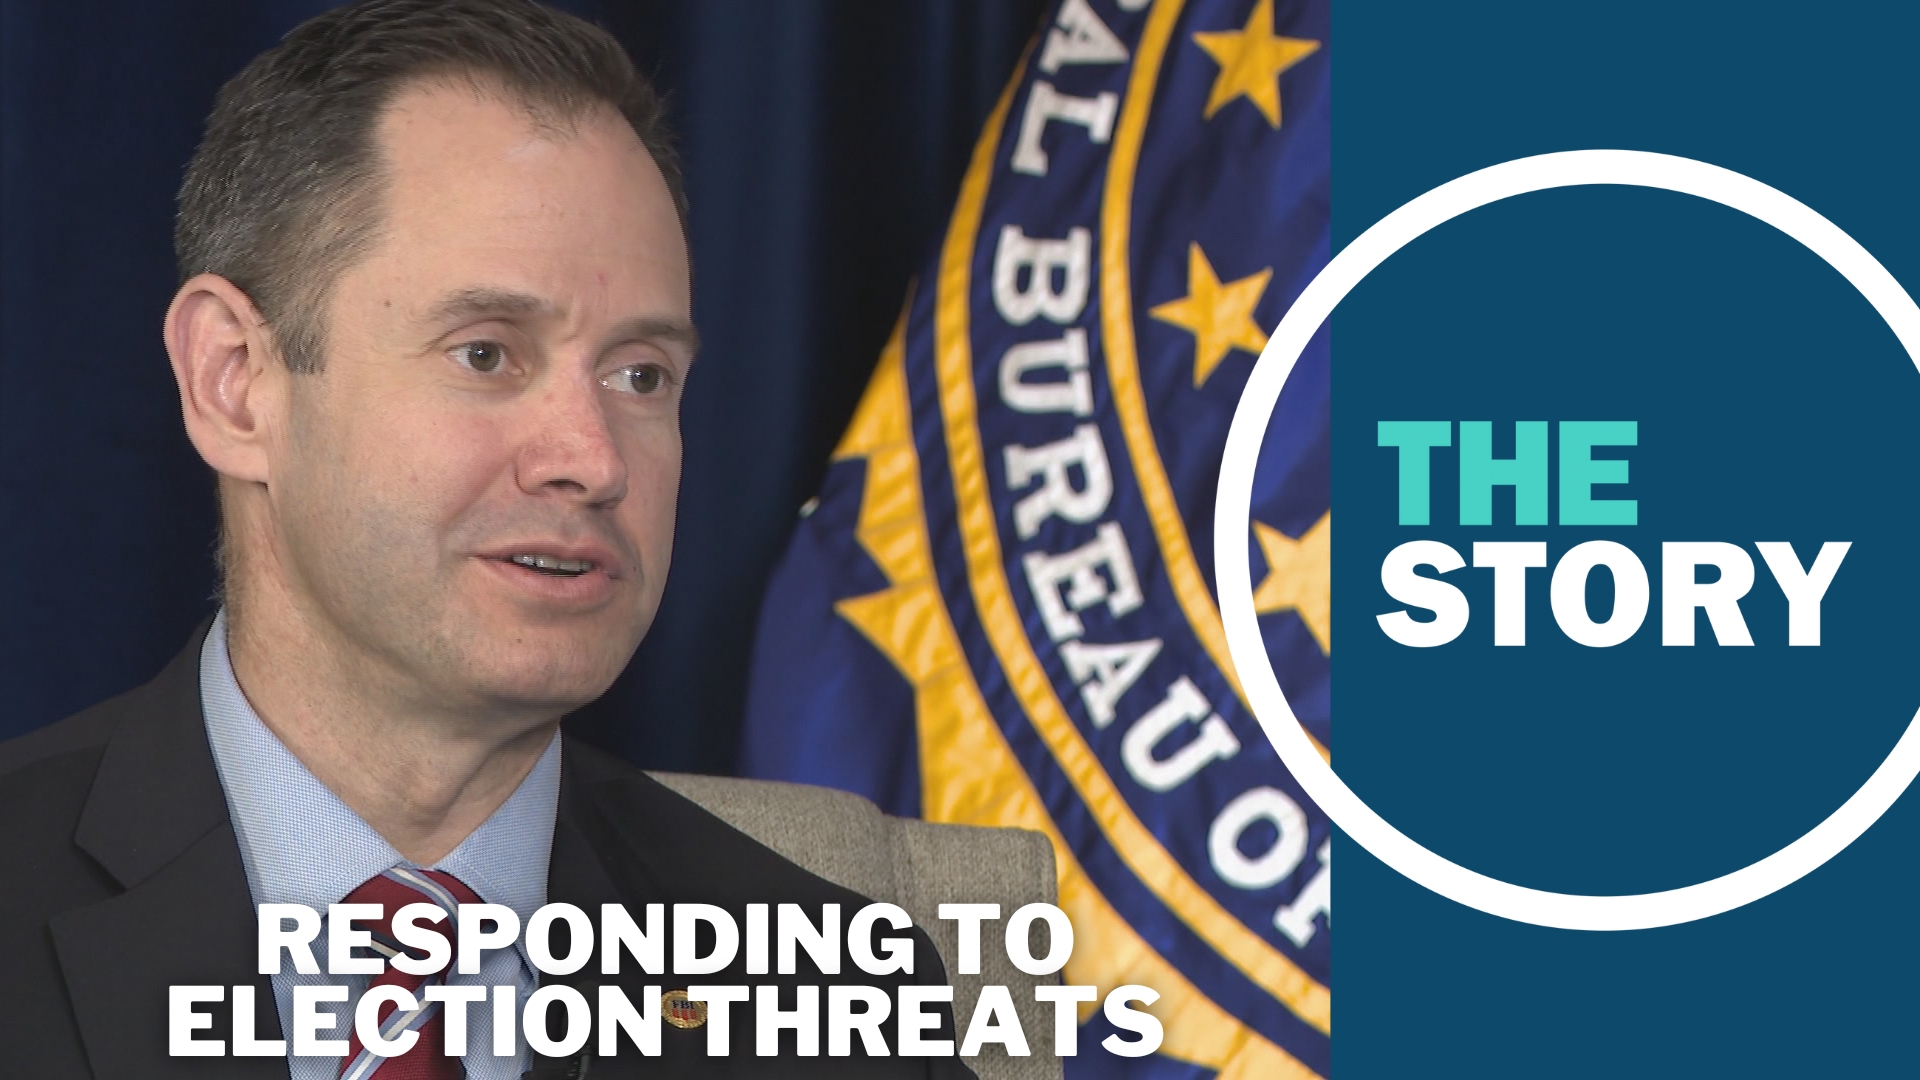 Special Agent in Charge Doug Olson said the FBI has already gamed out some potential scenarios with election officials ahead of the 2024 general election.